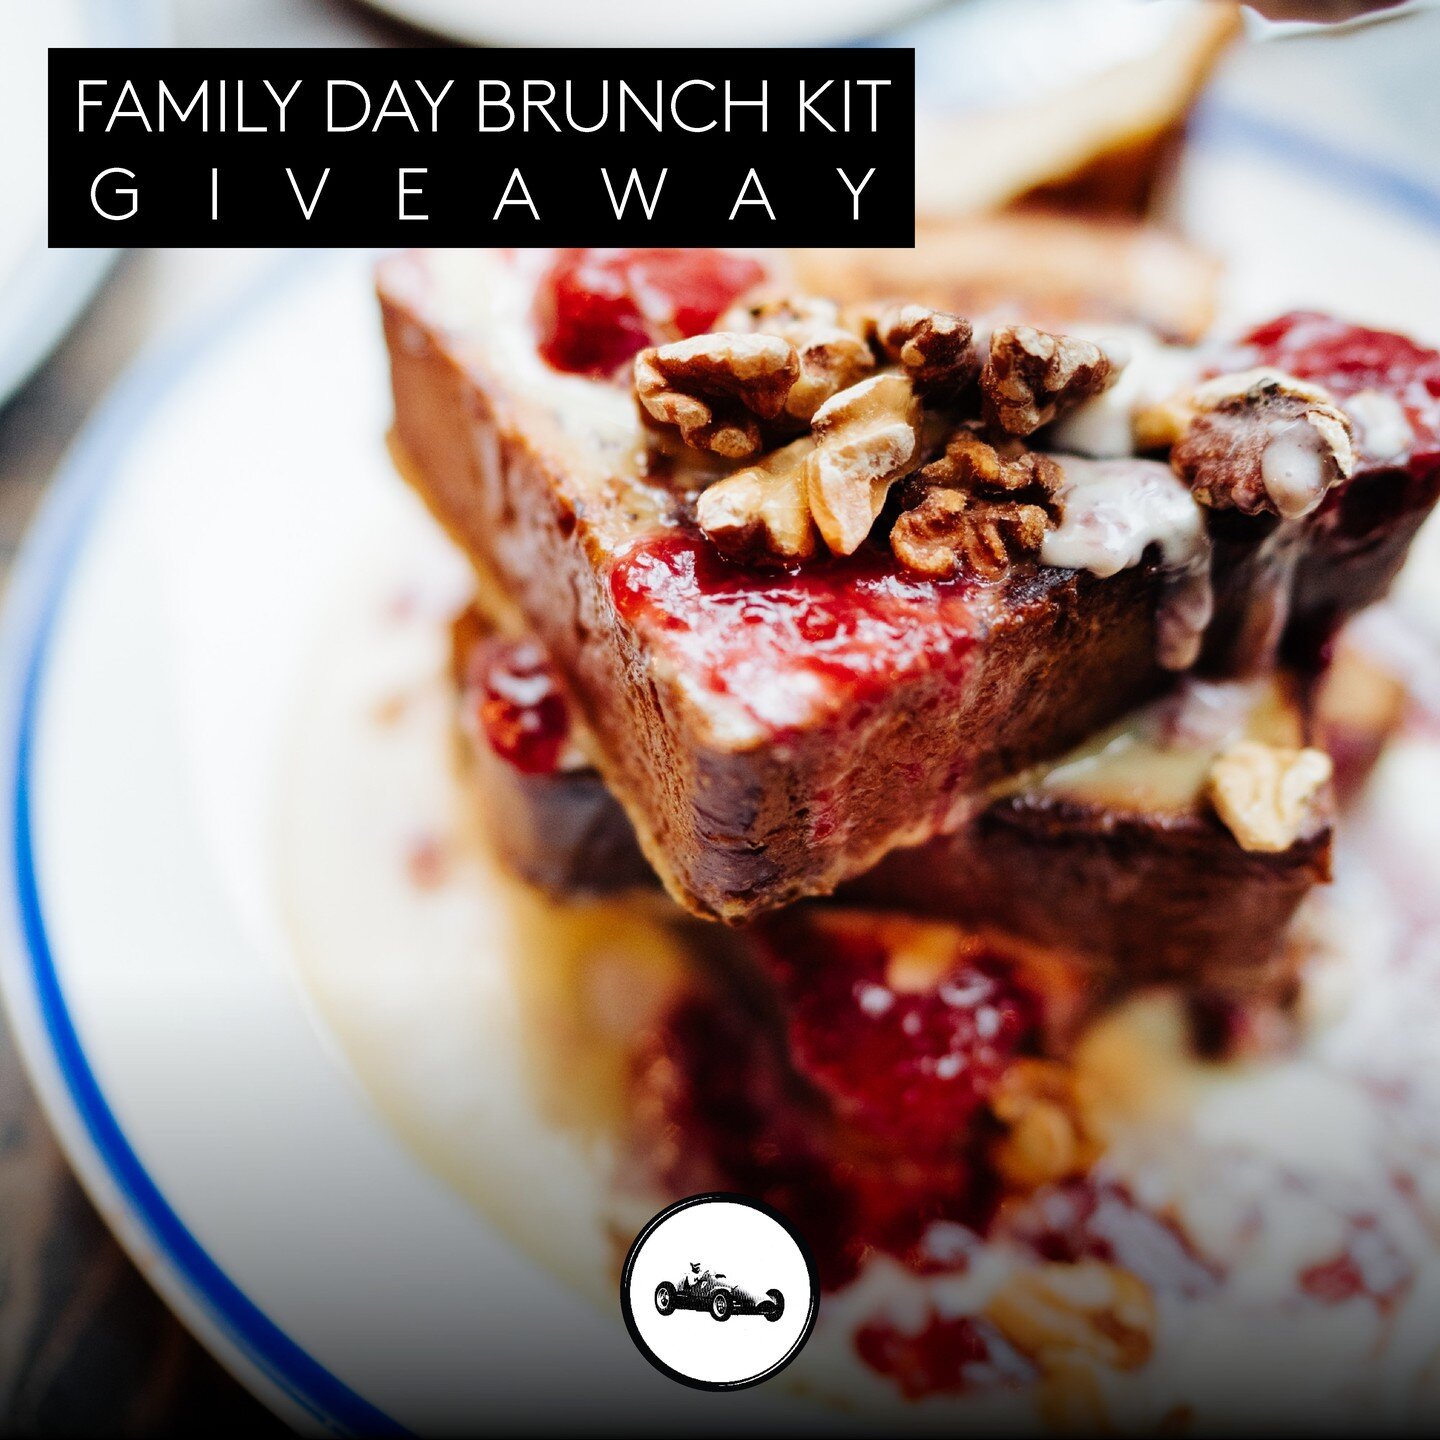 ⭐ Ascari Family Weekend Brunch Kit Contest!⭐ 

What's better than enjoying this scrumptious brunch kit over Family Day Long Weekend? Winning it of course!

We&rsquo;ve taken all the guesswork out by curating a well-rounded French-inspired meal that t